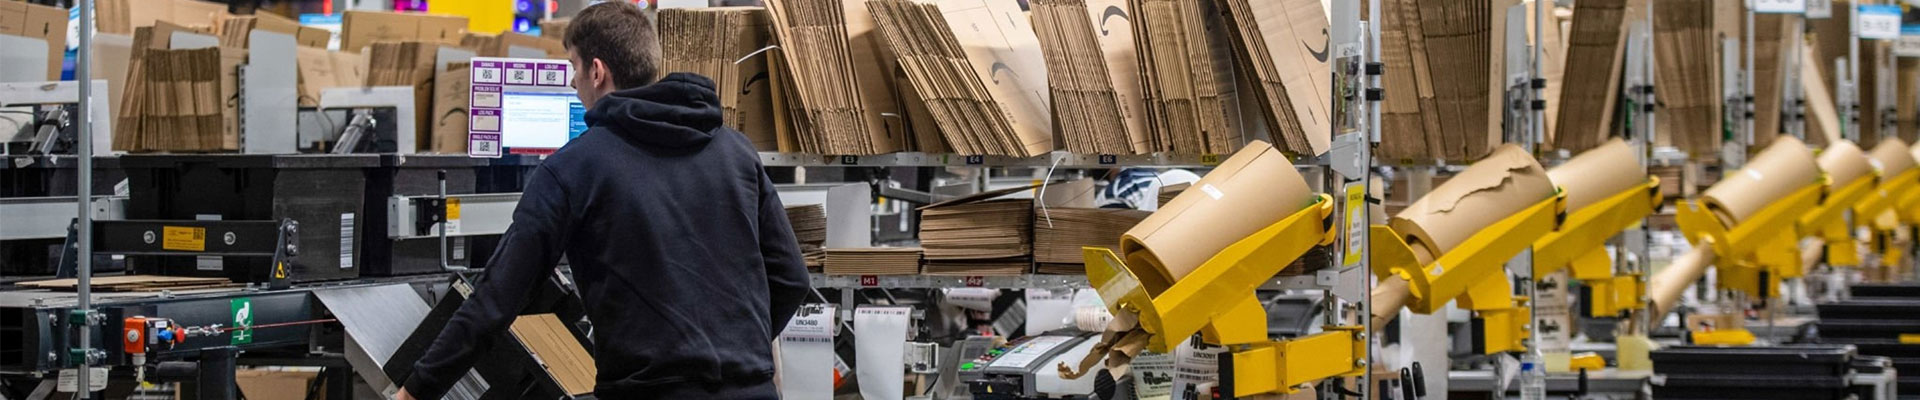 An amazon employee prepares to begin the process of packaging orders, which can be streamlined by finding the right Amazon FBA partner.